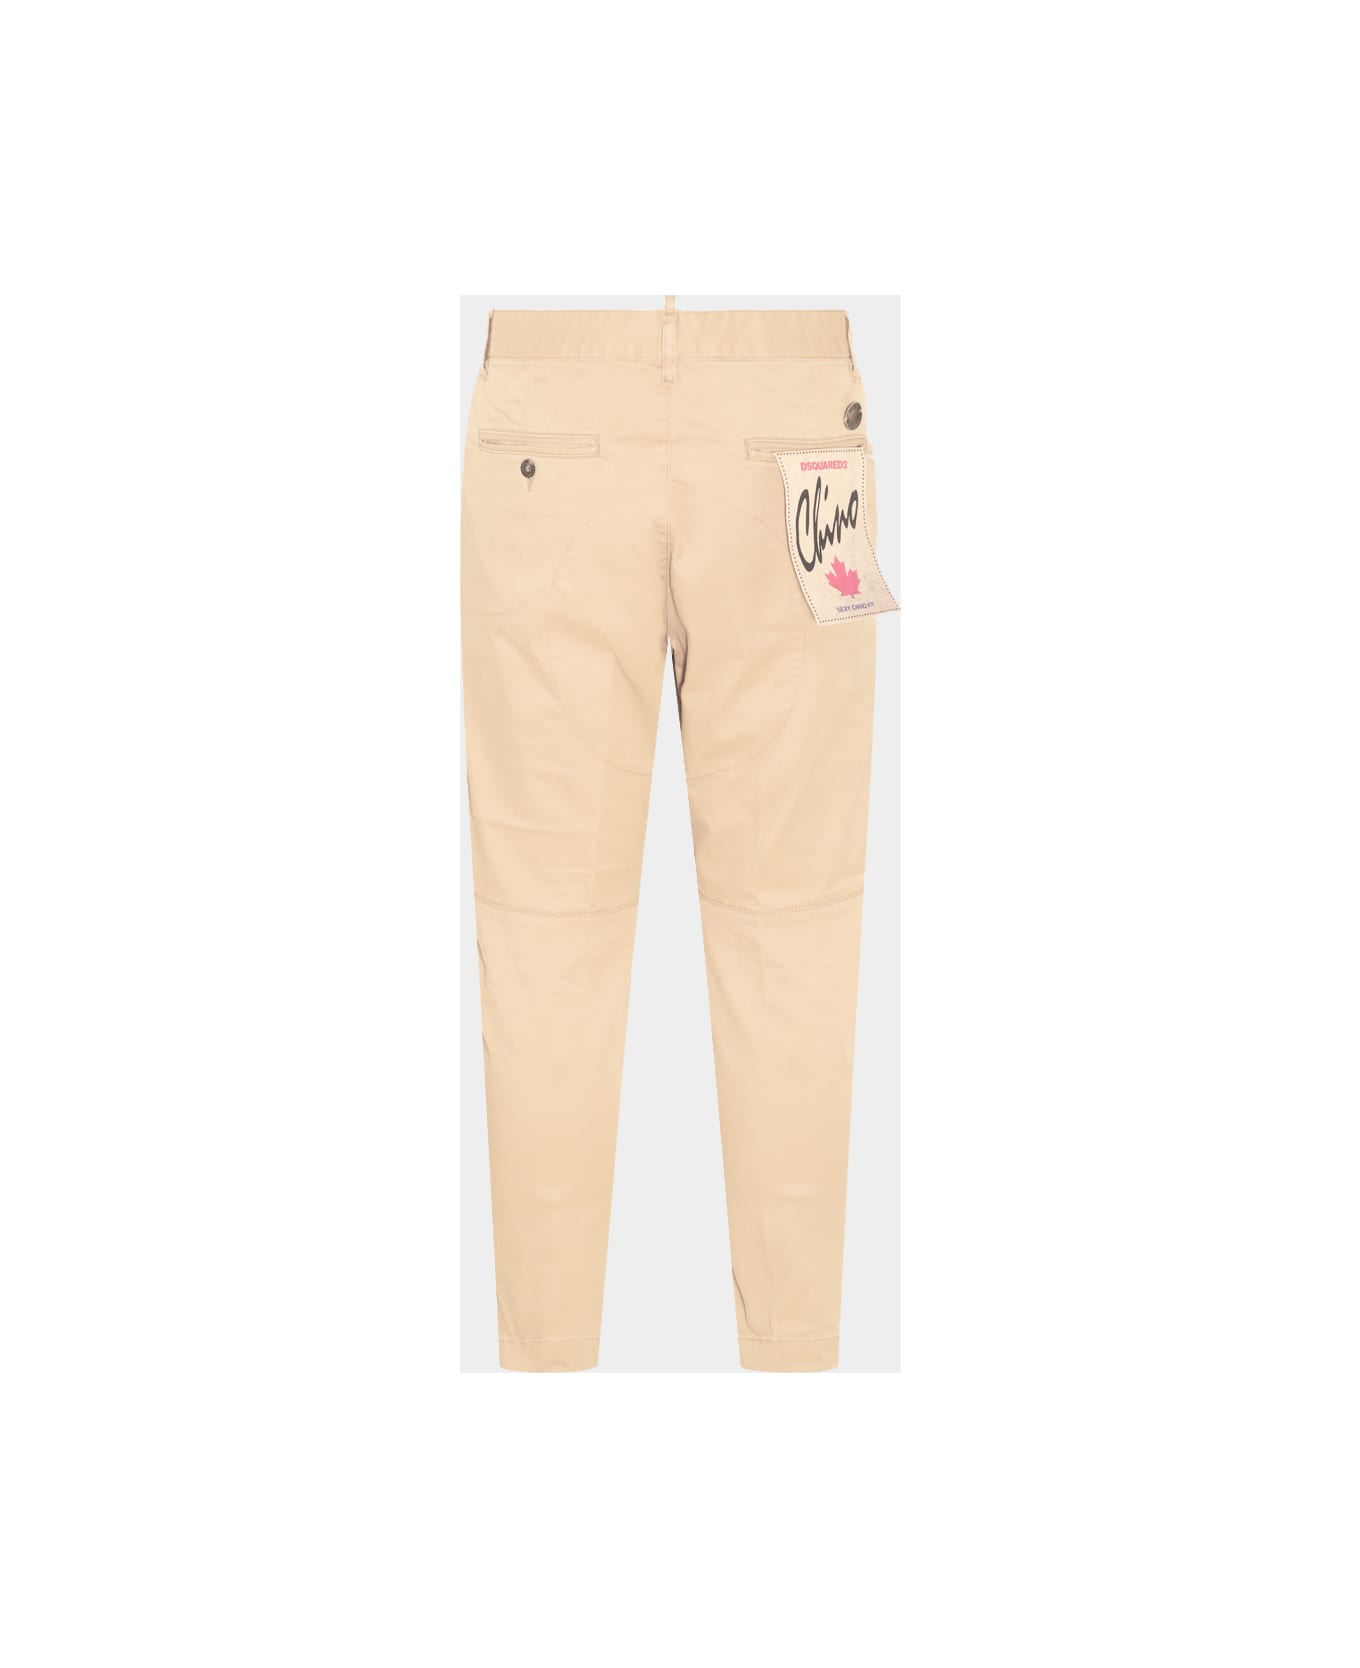 Dsquared2 Beige Cotton Blend Trousers - Stone